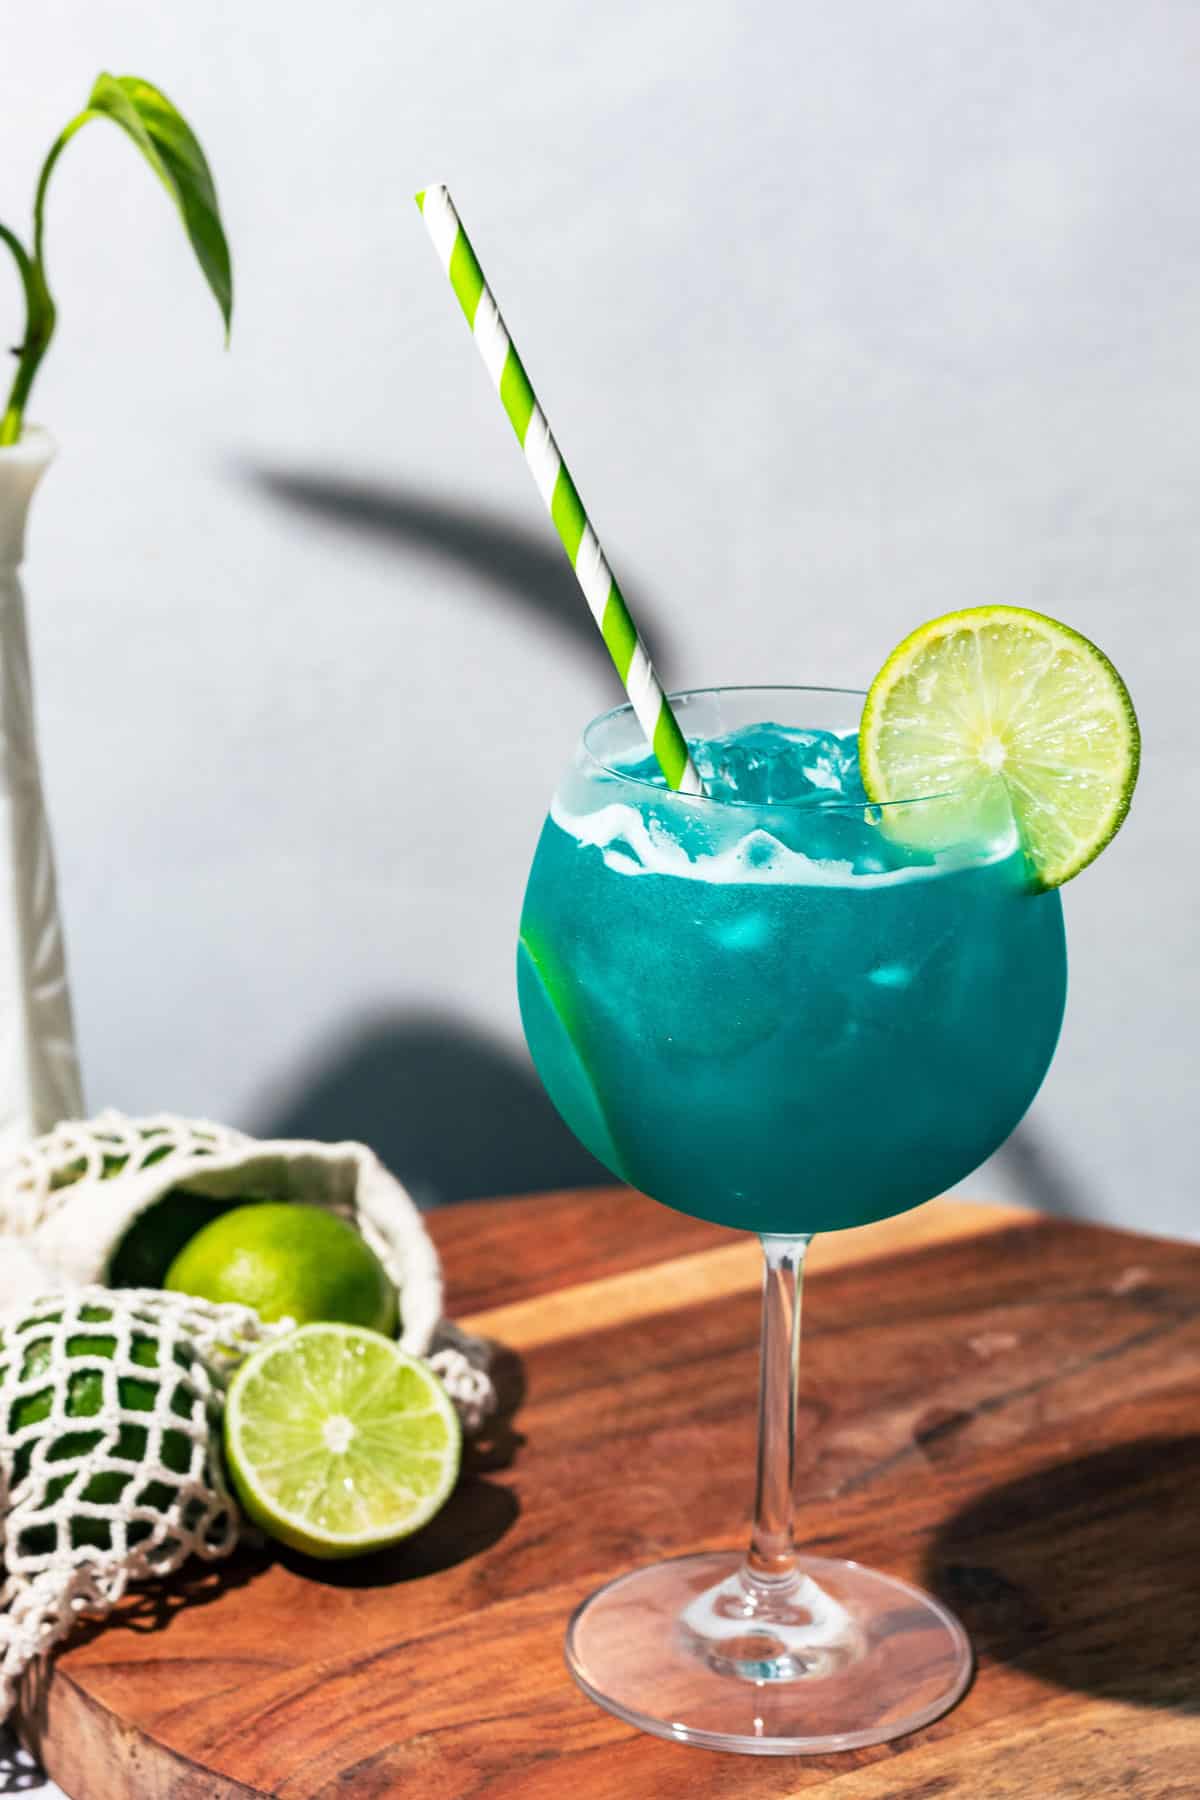 Mermaid Water Margarita on a wood surface with a green paper straw and lime slice garnish.